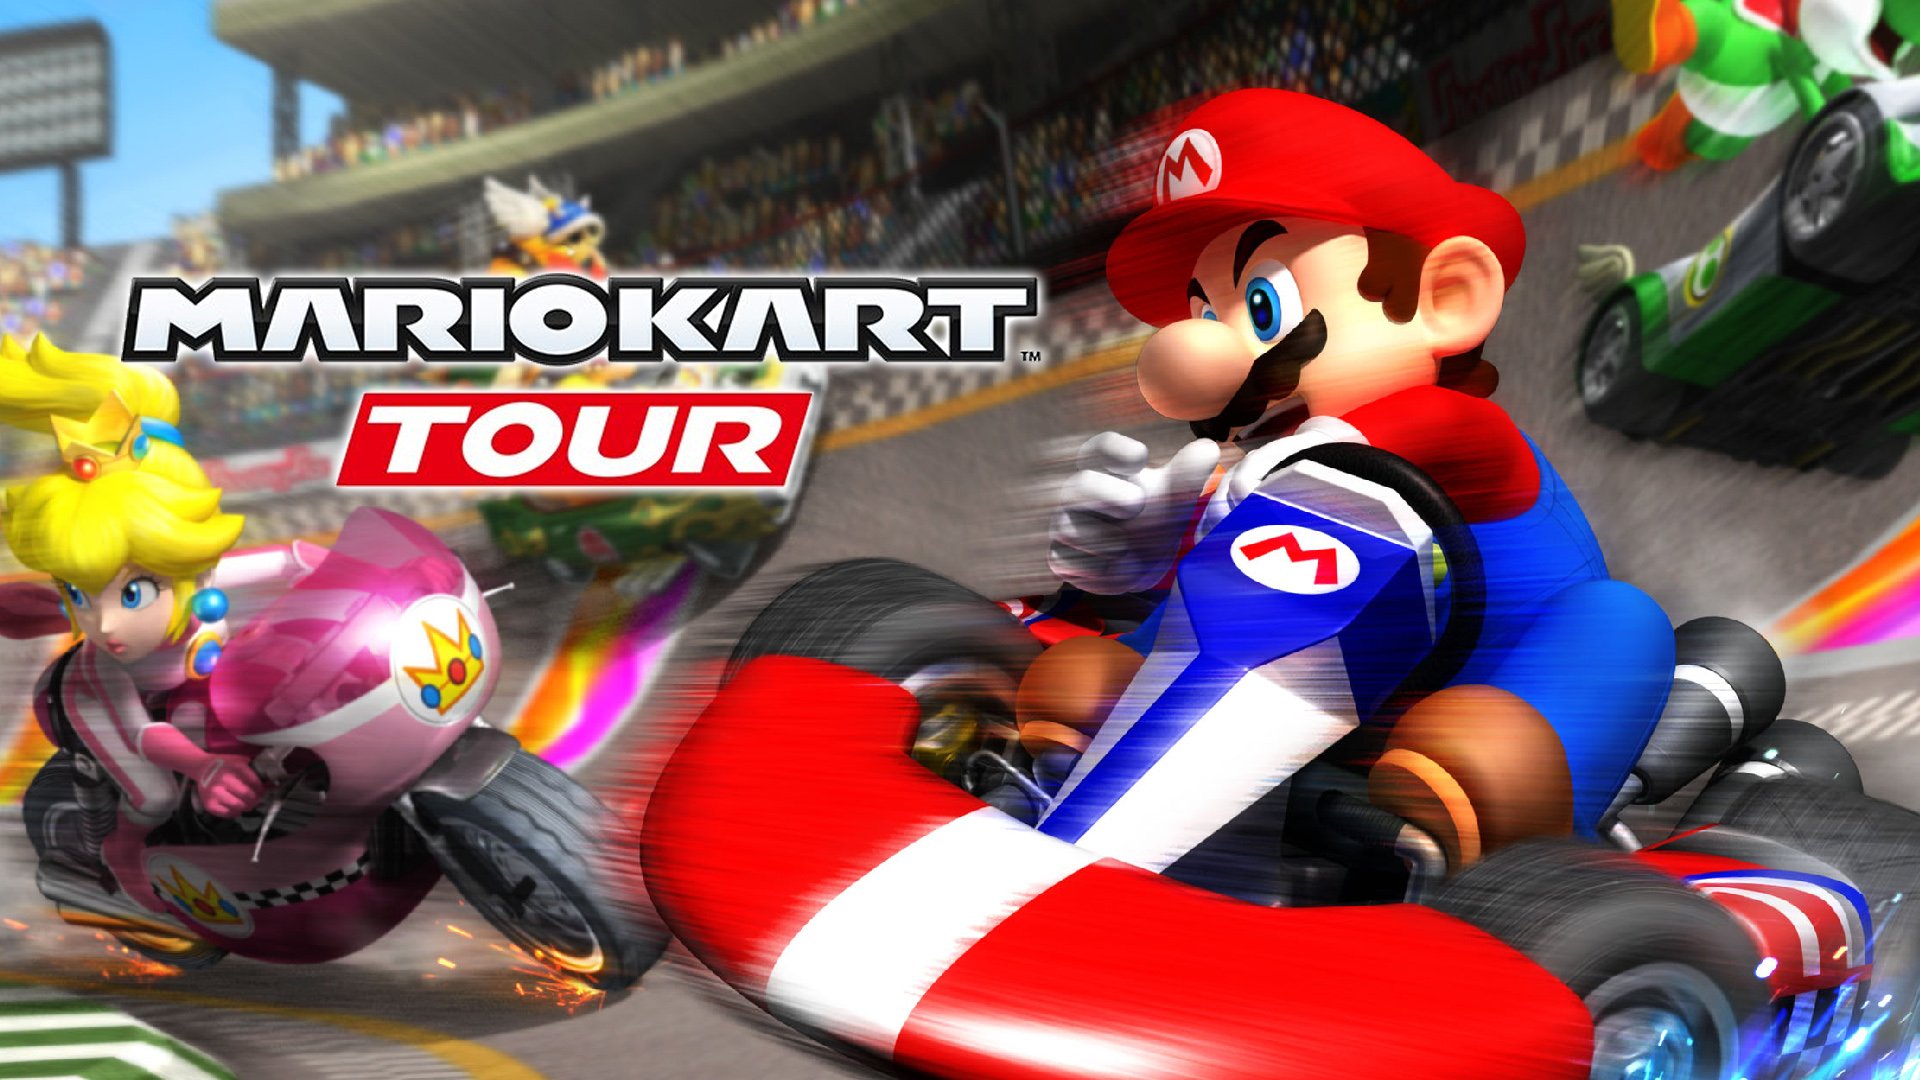 Mario Kart Tour will go into beta on Android from May